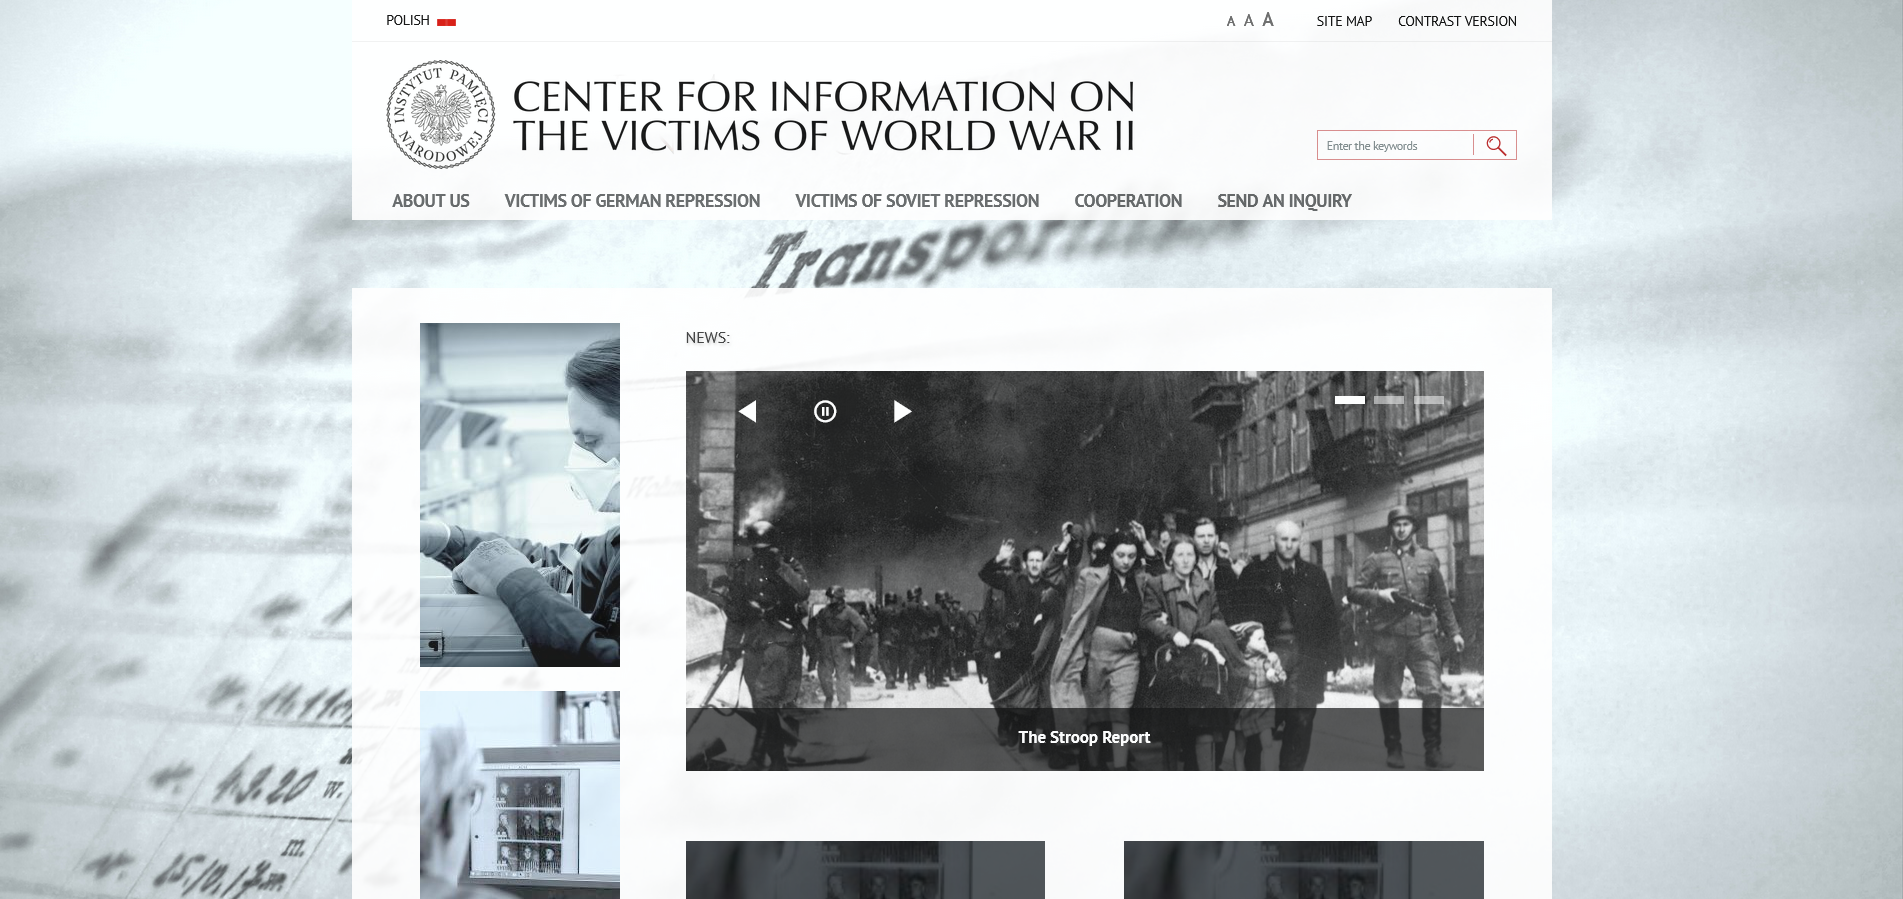 The Center for Information on Victims of WWI